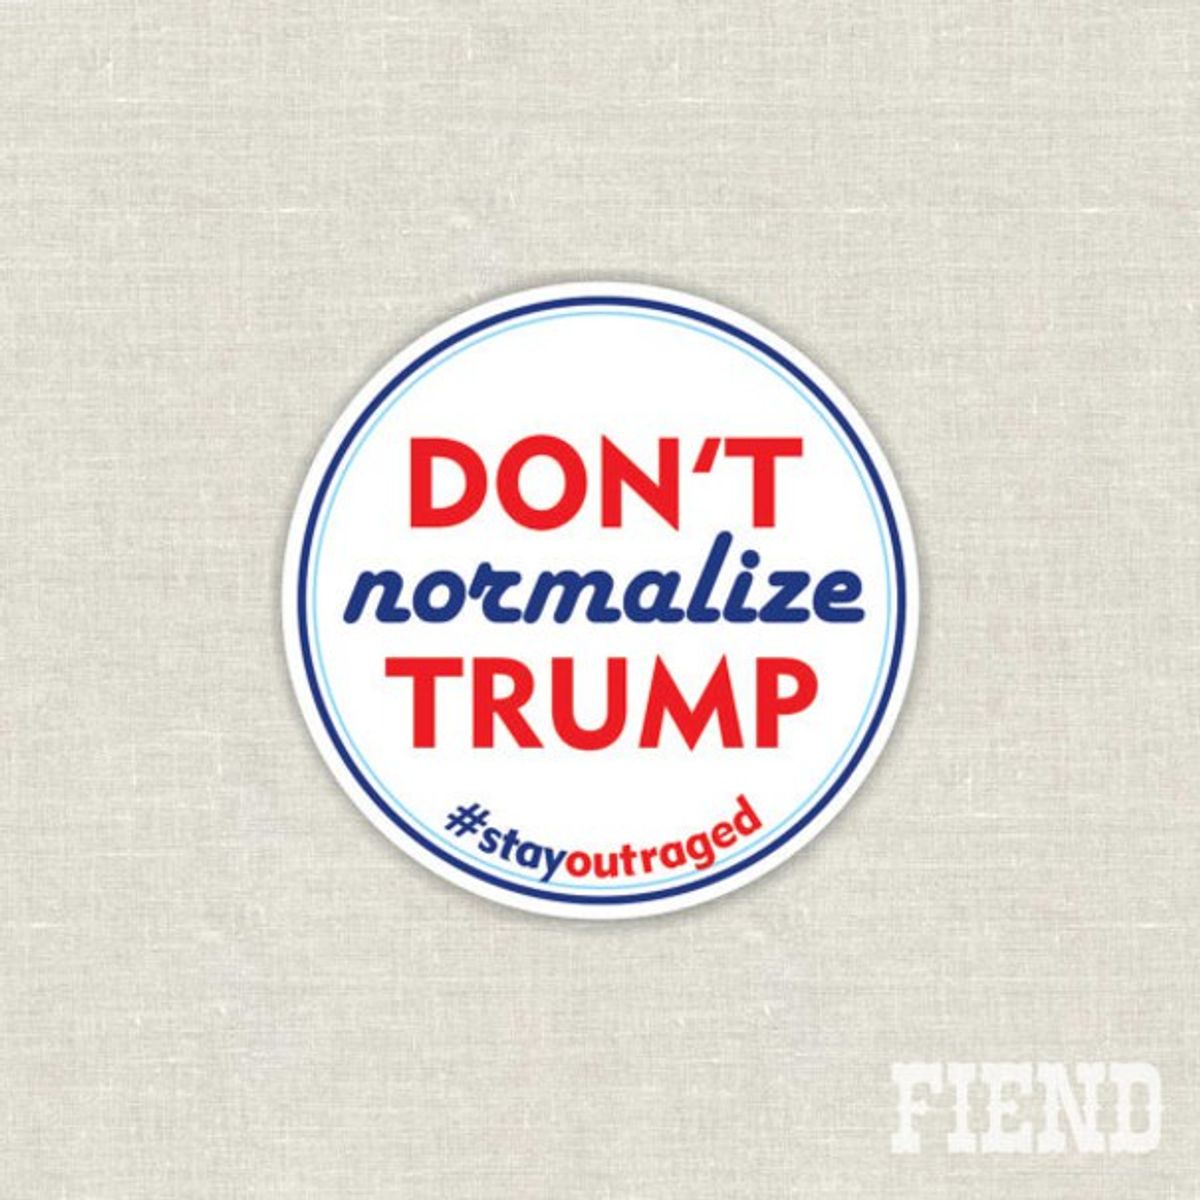 If You Normalize Trump, You Normalize Hate